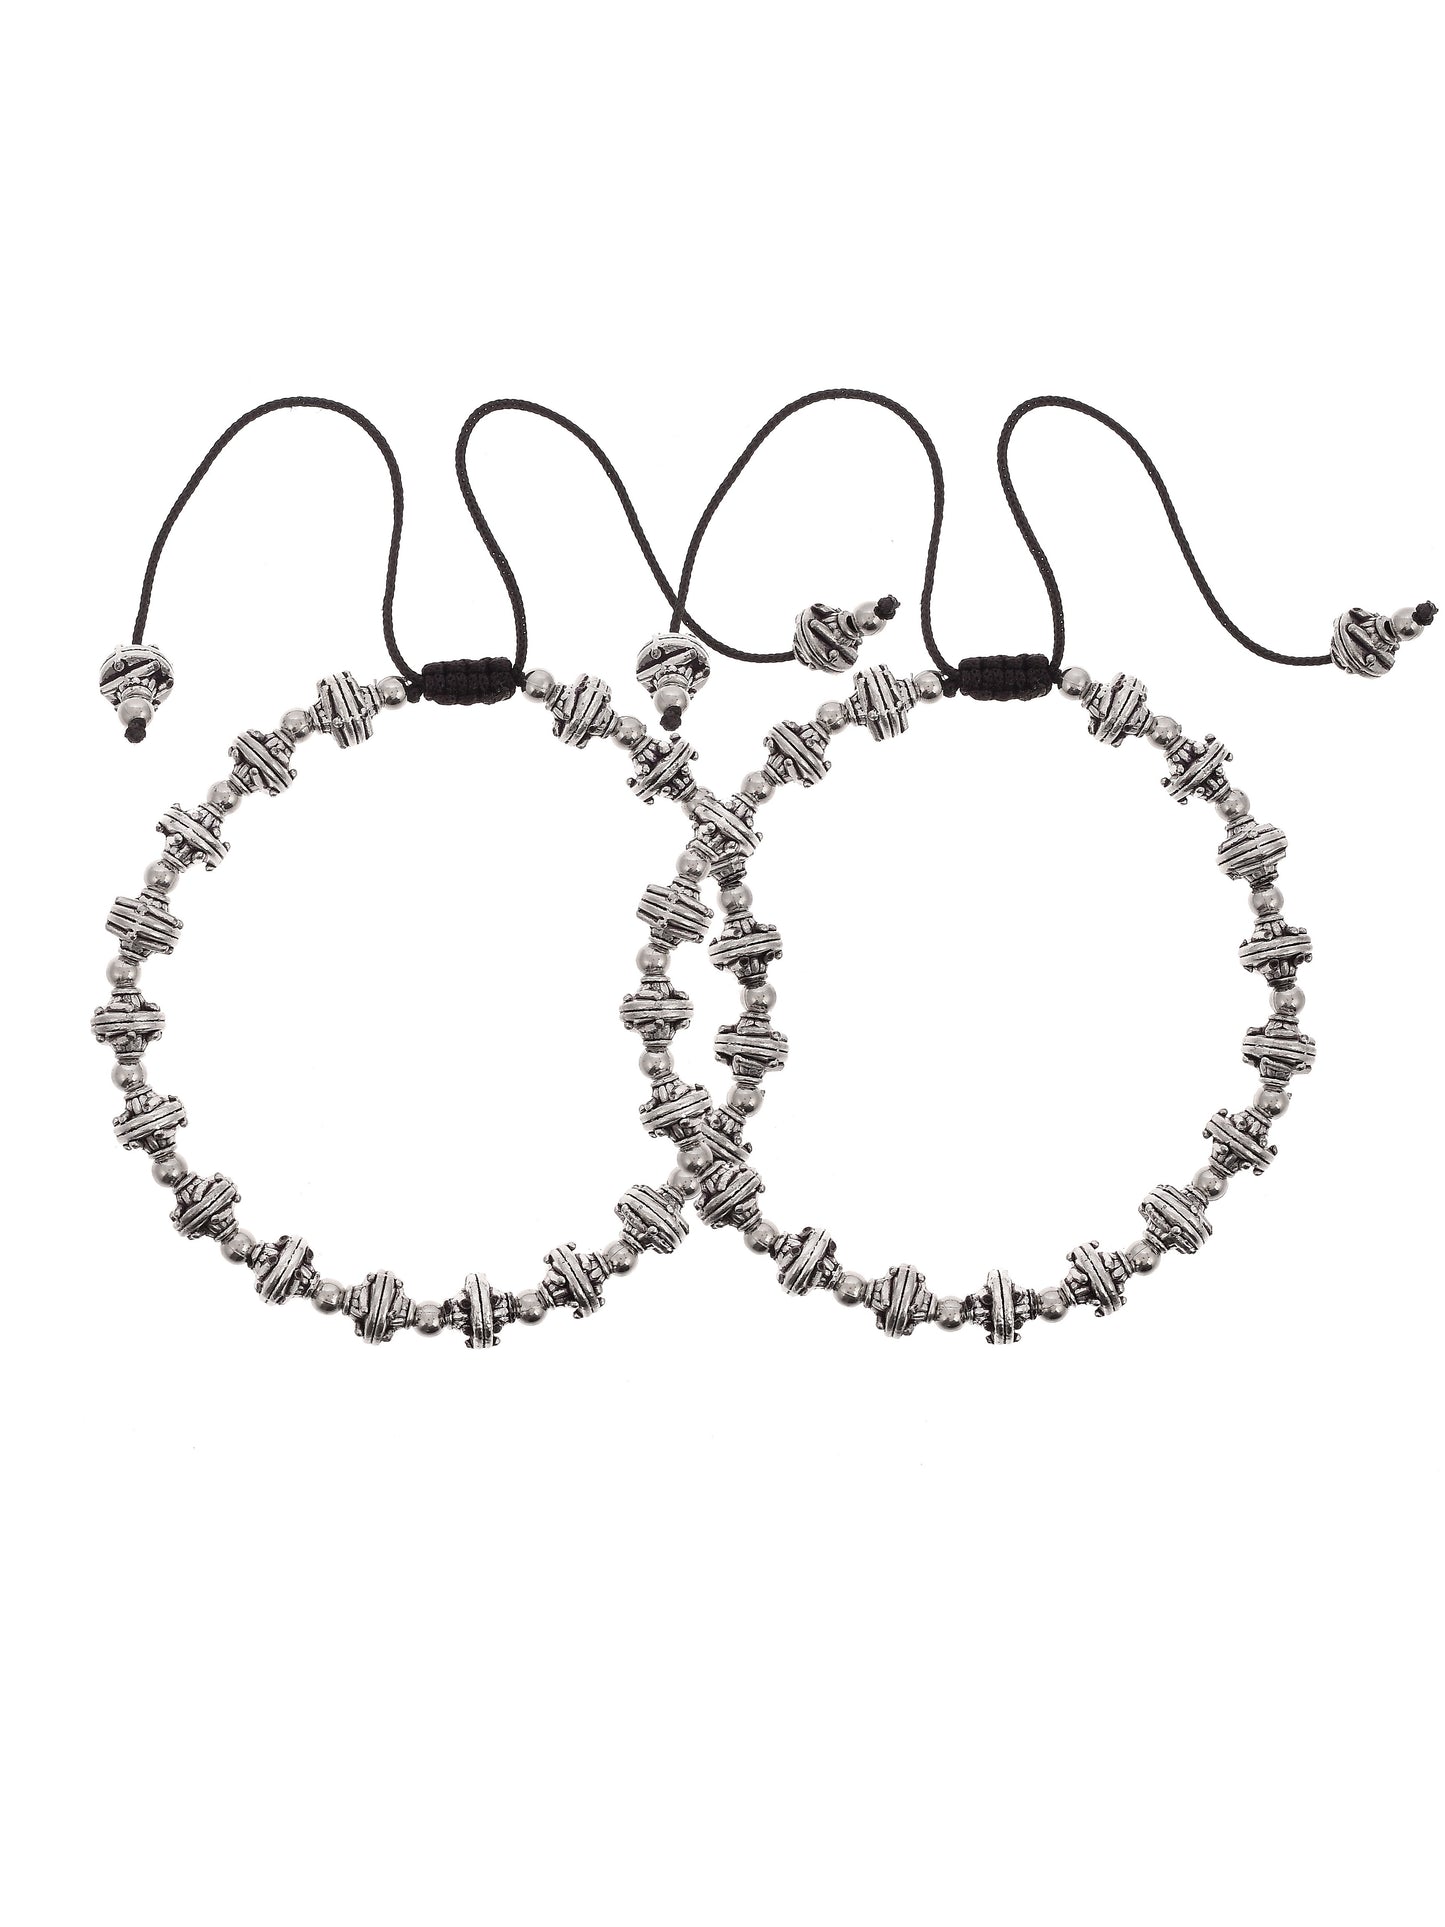 Silver Plated Oxidized Black Thread Anklets for women